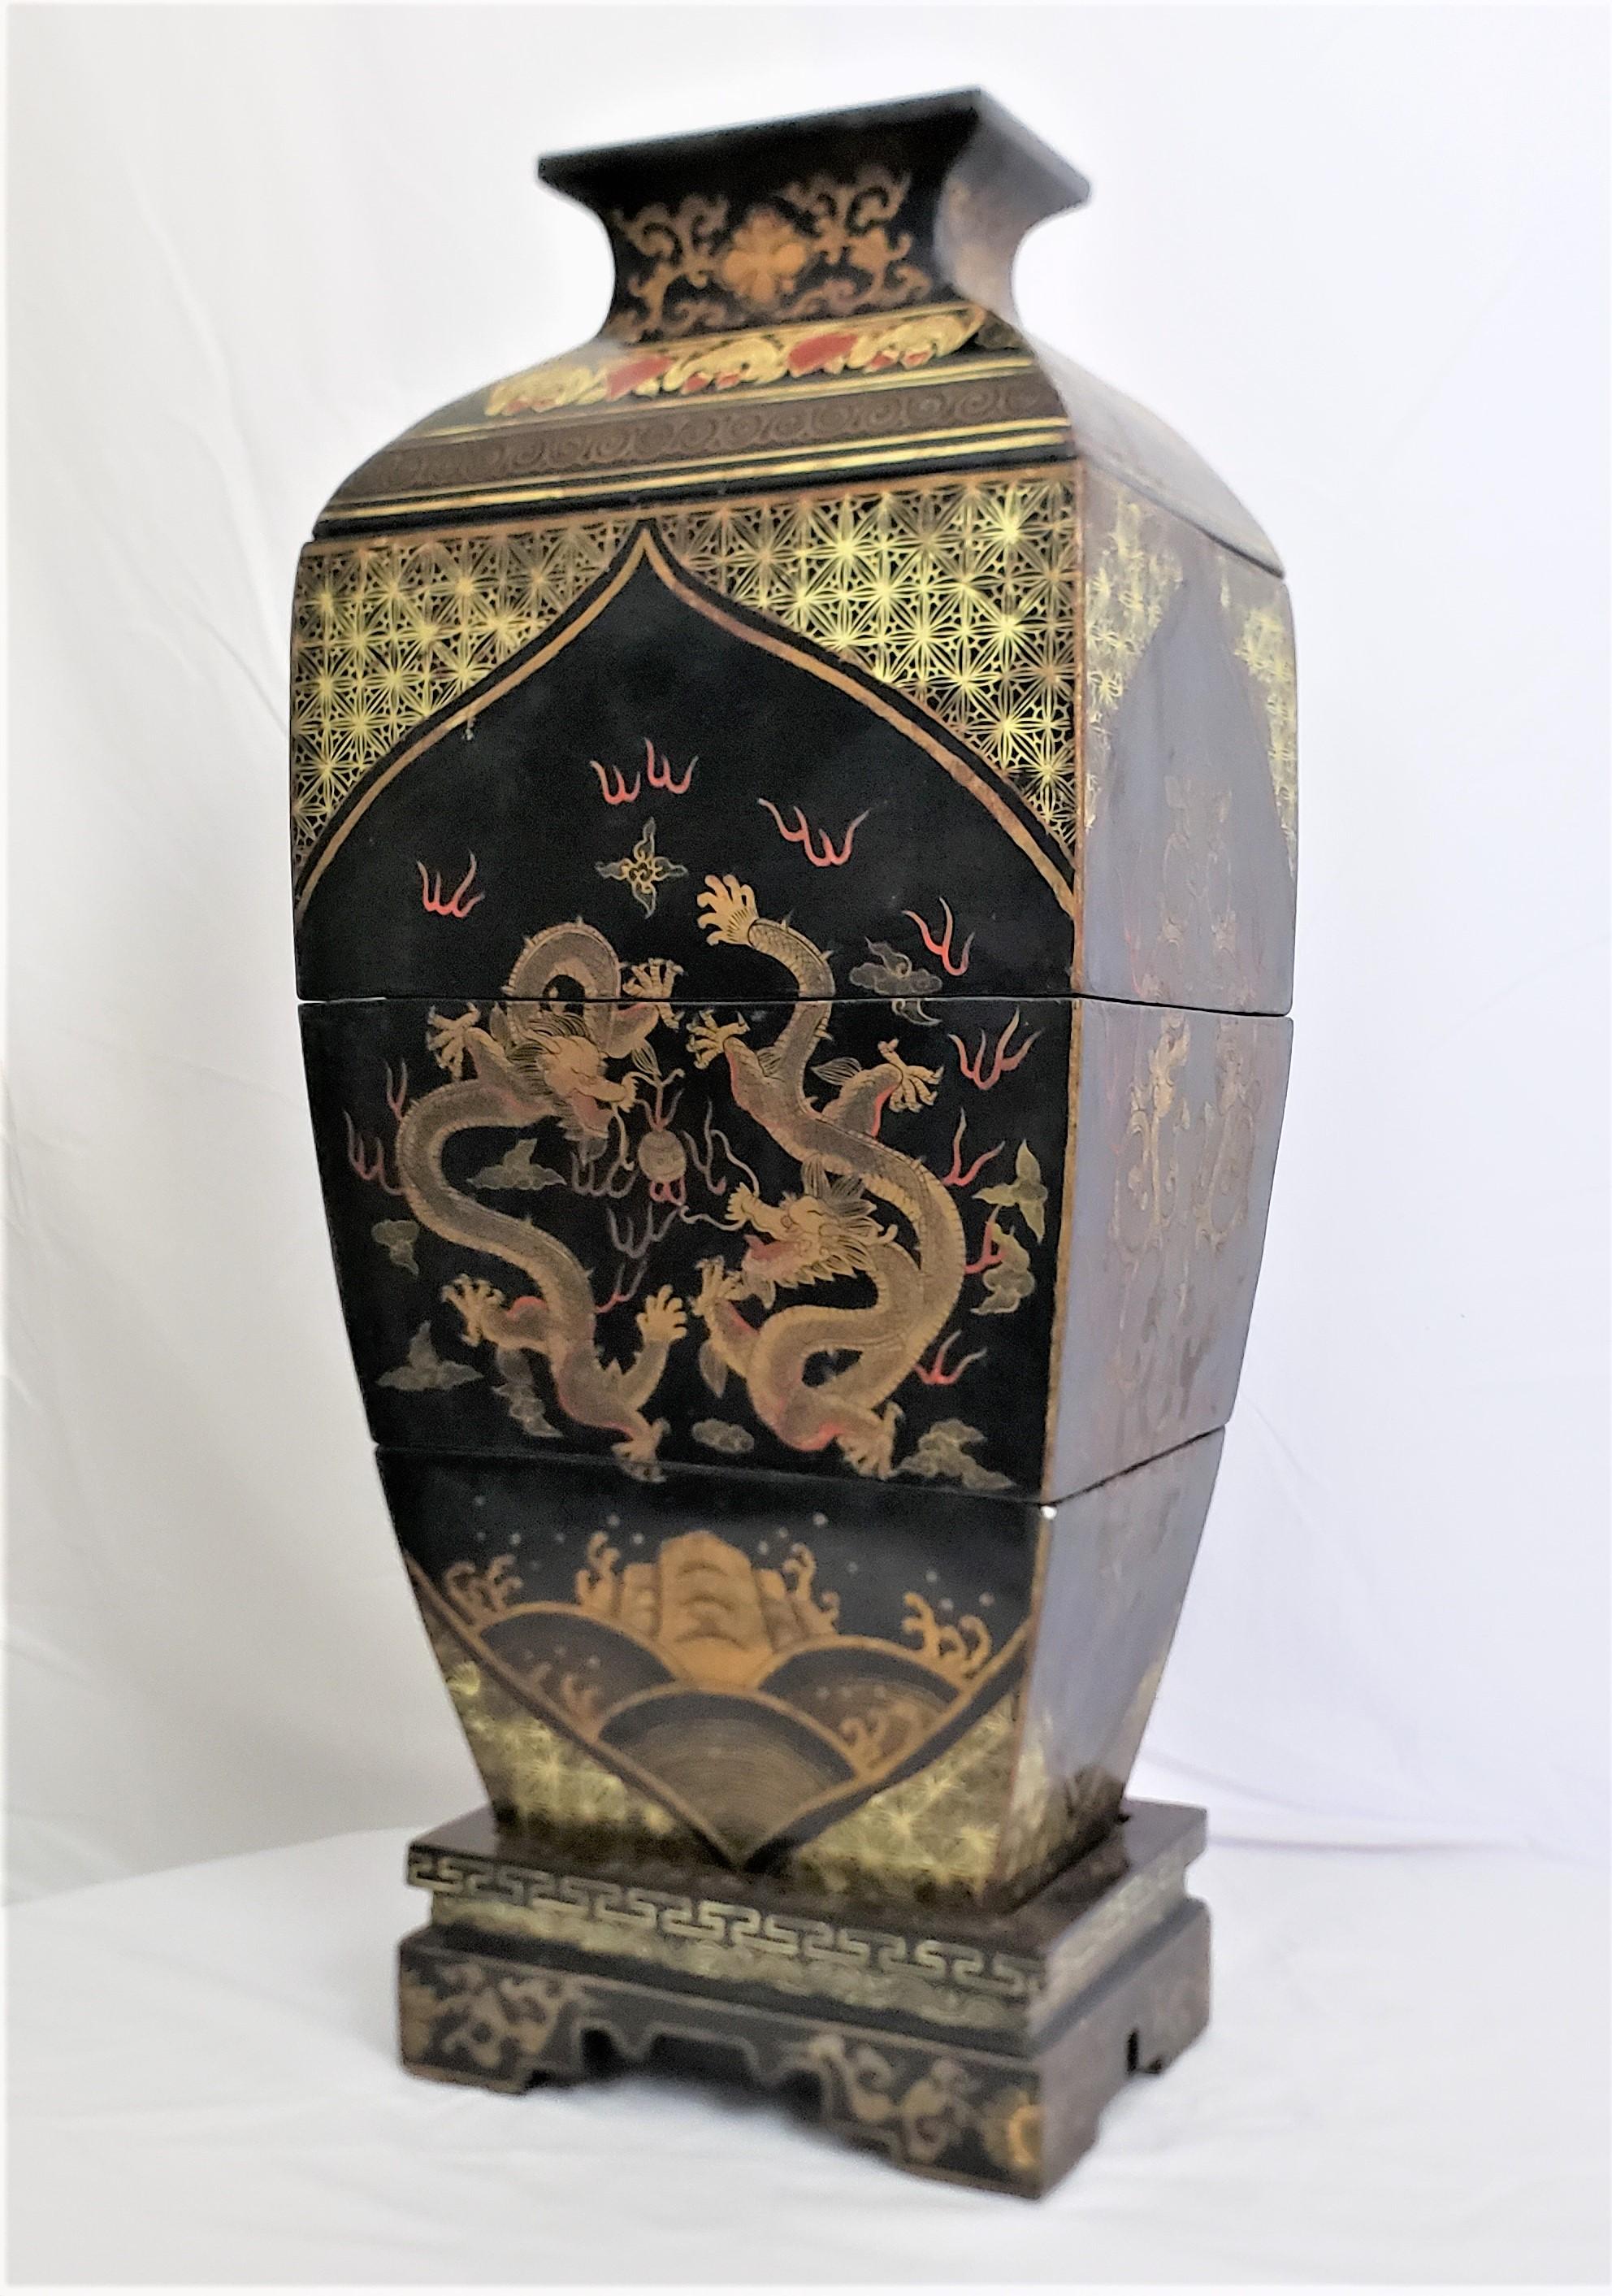 This antique lacquered stacking box set is unsigned, but presumed to have originated from China during the Early Republic period of approximately 1920 and done in a period Chinese Export style. The set is composed of a base and top and three